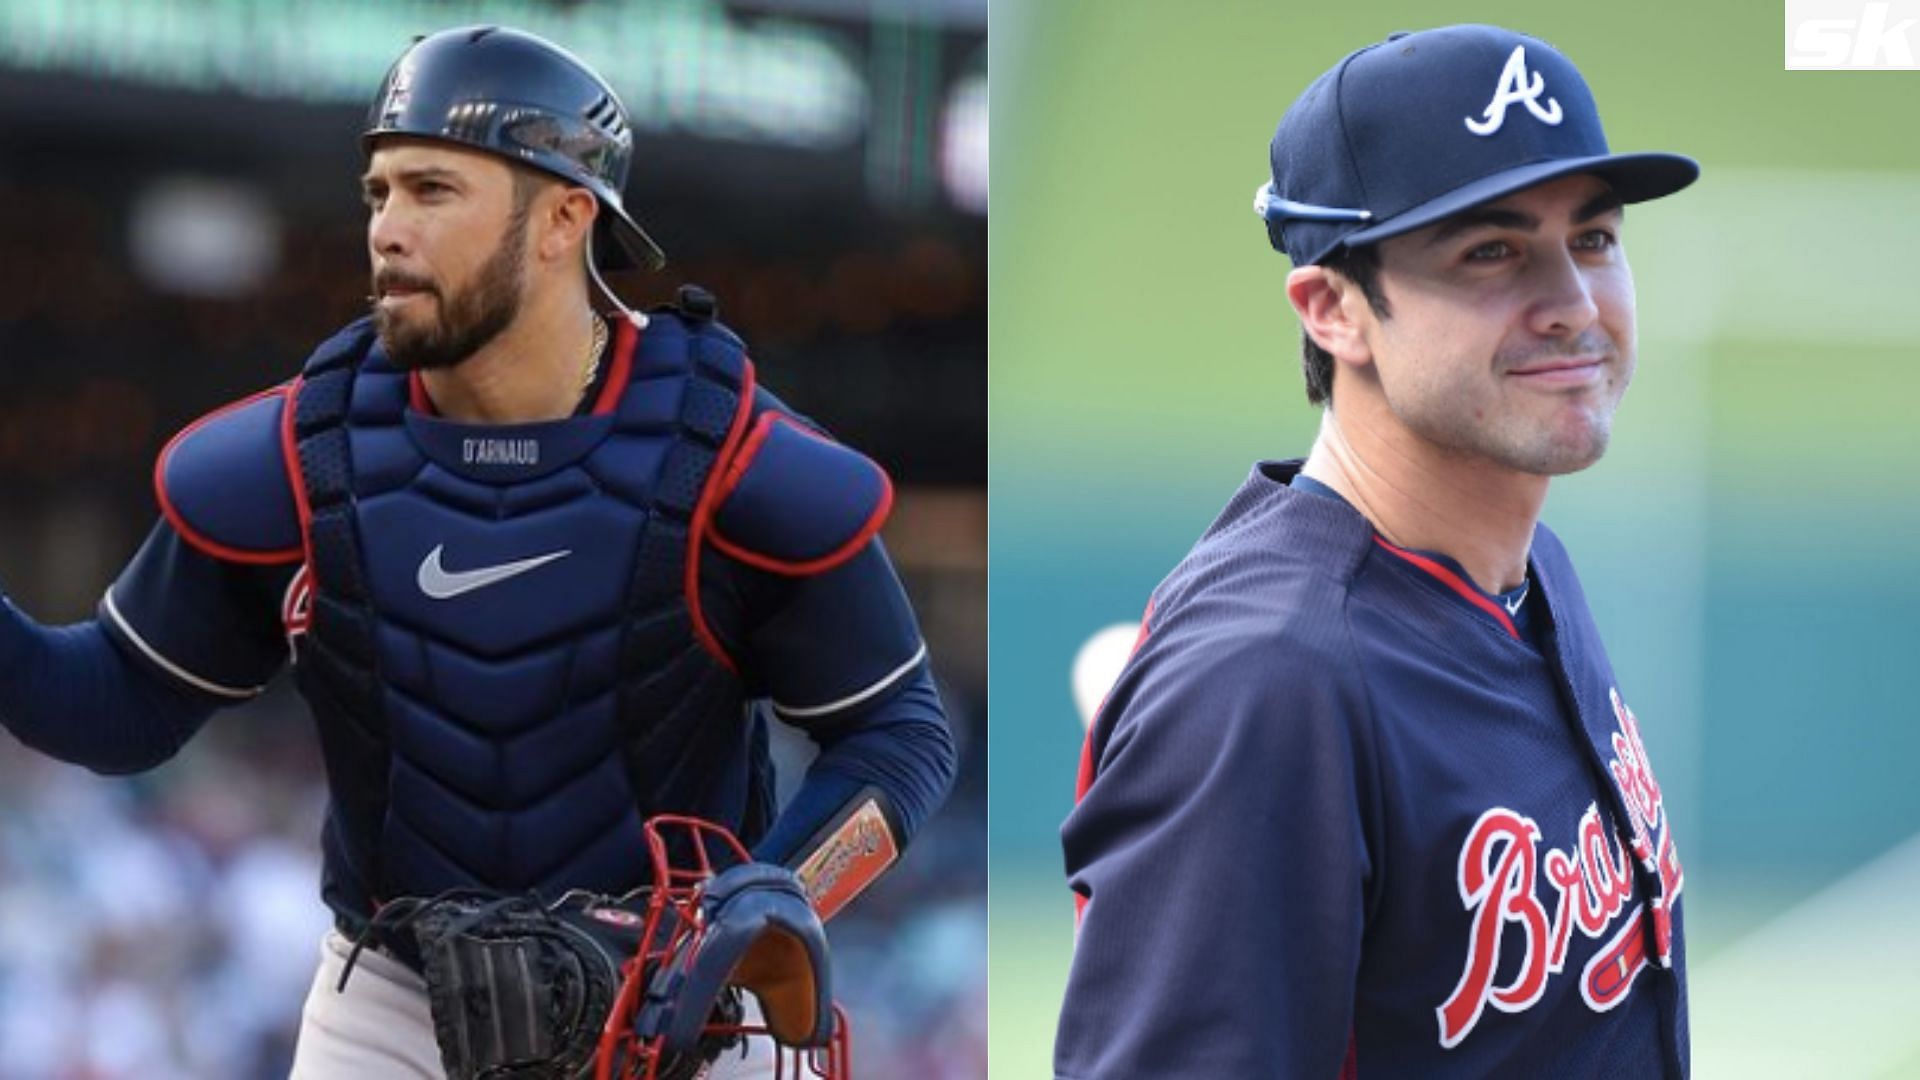 Are Travis d'Arnaud and Chase d'Arnaud related? Looking at the